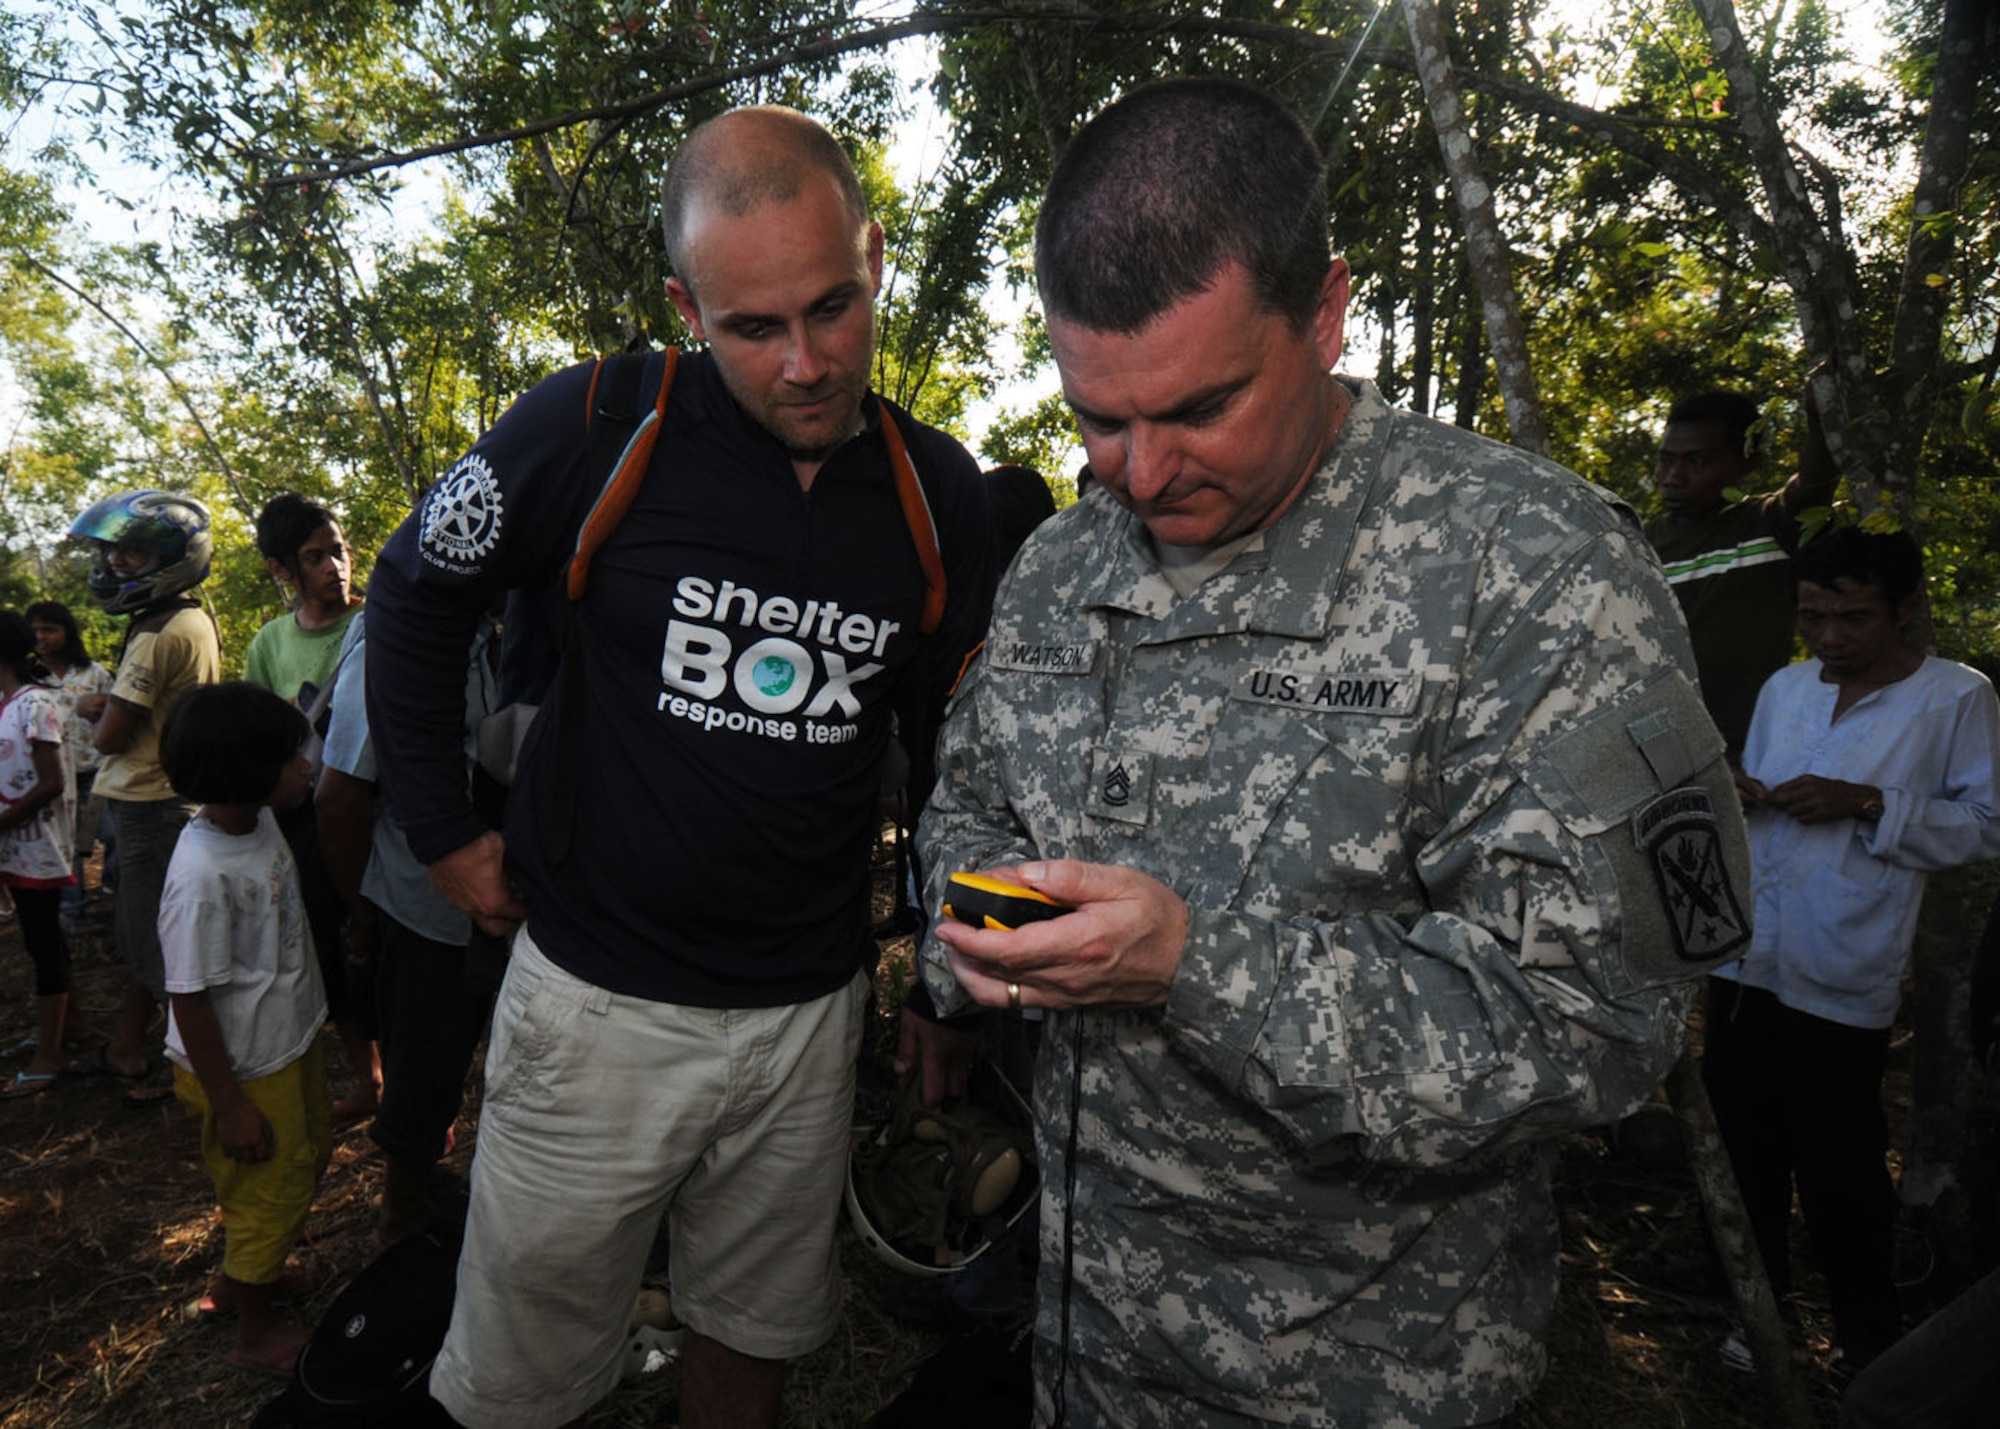 Army Sgt. 1st Class Justin Watson (right), 97th Civil Affairs Battalion at Fort Bragg, N.C., and Shane Ravill, a ShelterBox Trust volunteer, plot coordinates on a global positioning system Oct. 11. ShelterBox Trust, an international disaster relief charity that delivers emergency shelters to people affected by disasters, donated emergency shelter boxes following earthquakes that struck Indonesia Sept. 30. Each box contains a ten person tent, multi-fuel stove, blankets, water purification tablets, basic tools and cookware among others. The U.S. military, including a 71-member Air Force Humanitarian Assistance Rapid Response Team, is also in Indonesia assisting in relief efforts throughout Indonesia. (U.S. Air Force photo/ Staff Sgt. Veronica Pierce)